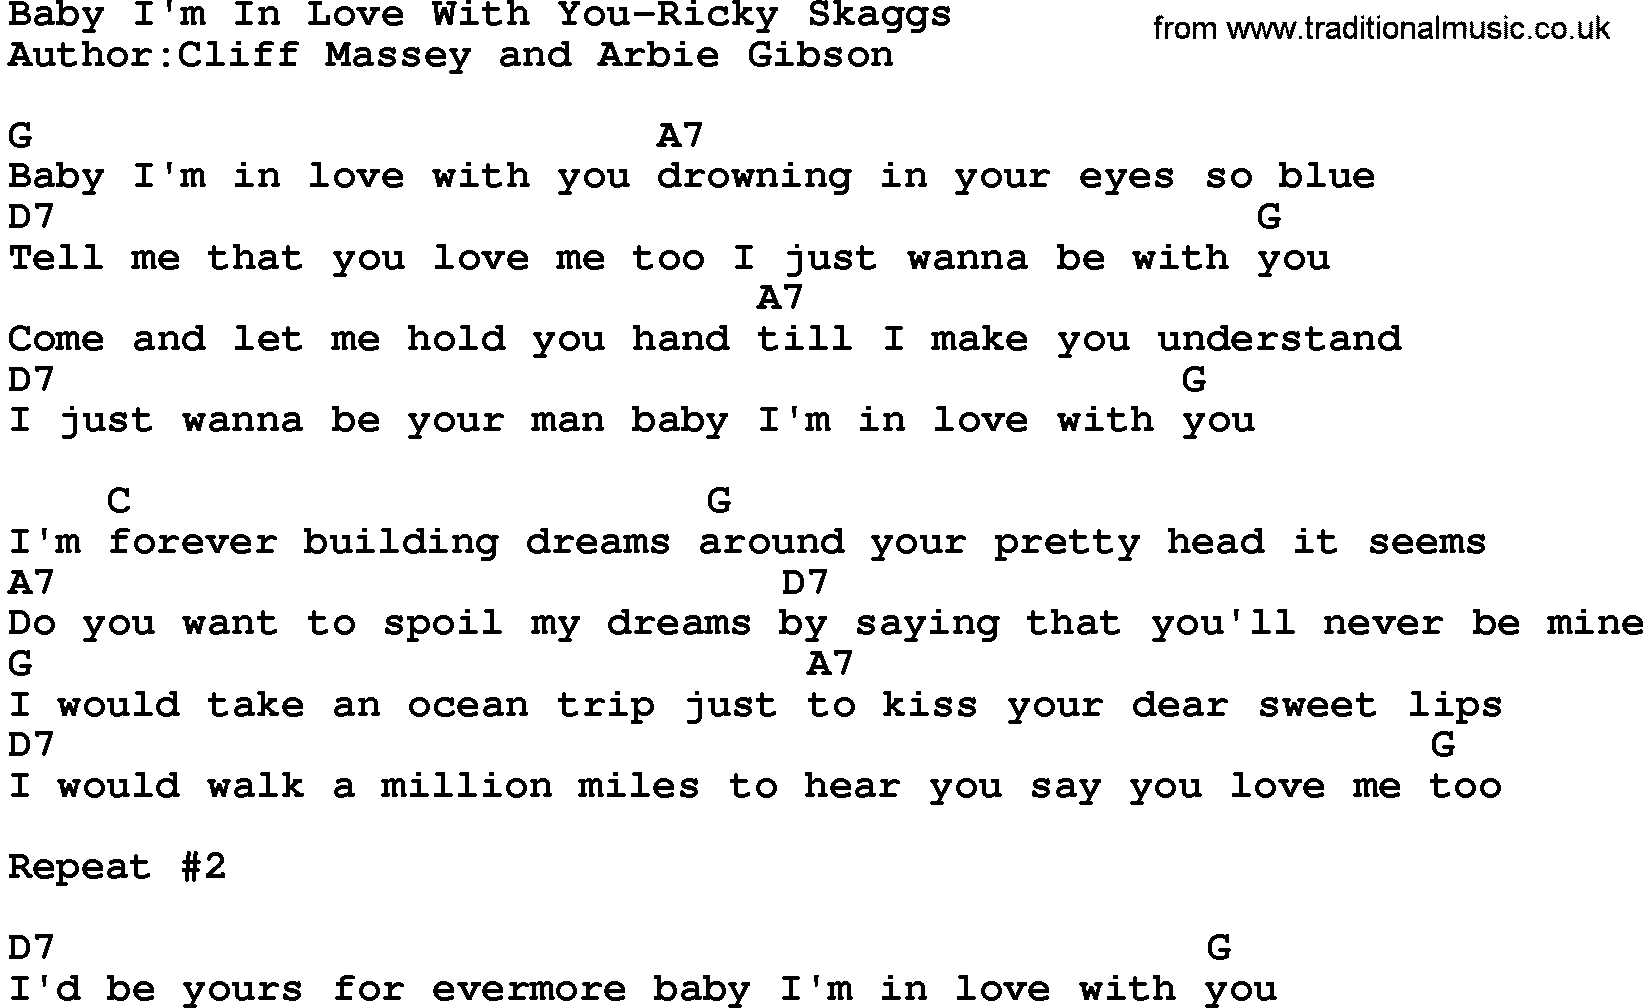 Country music song: Baby I'm In Love With You-Ricky Skaggs lyrics and chords